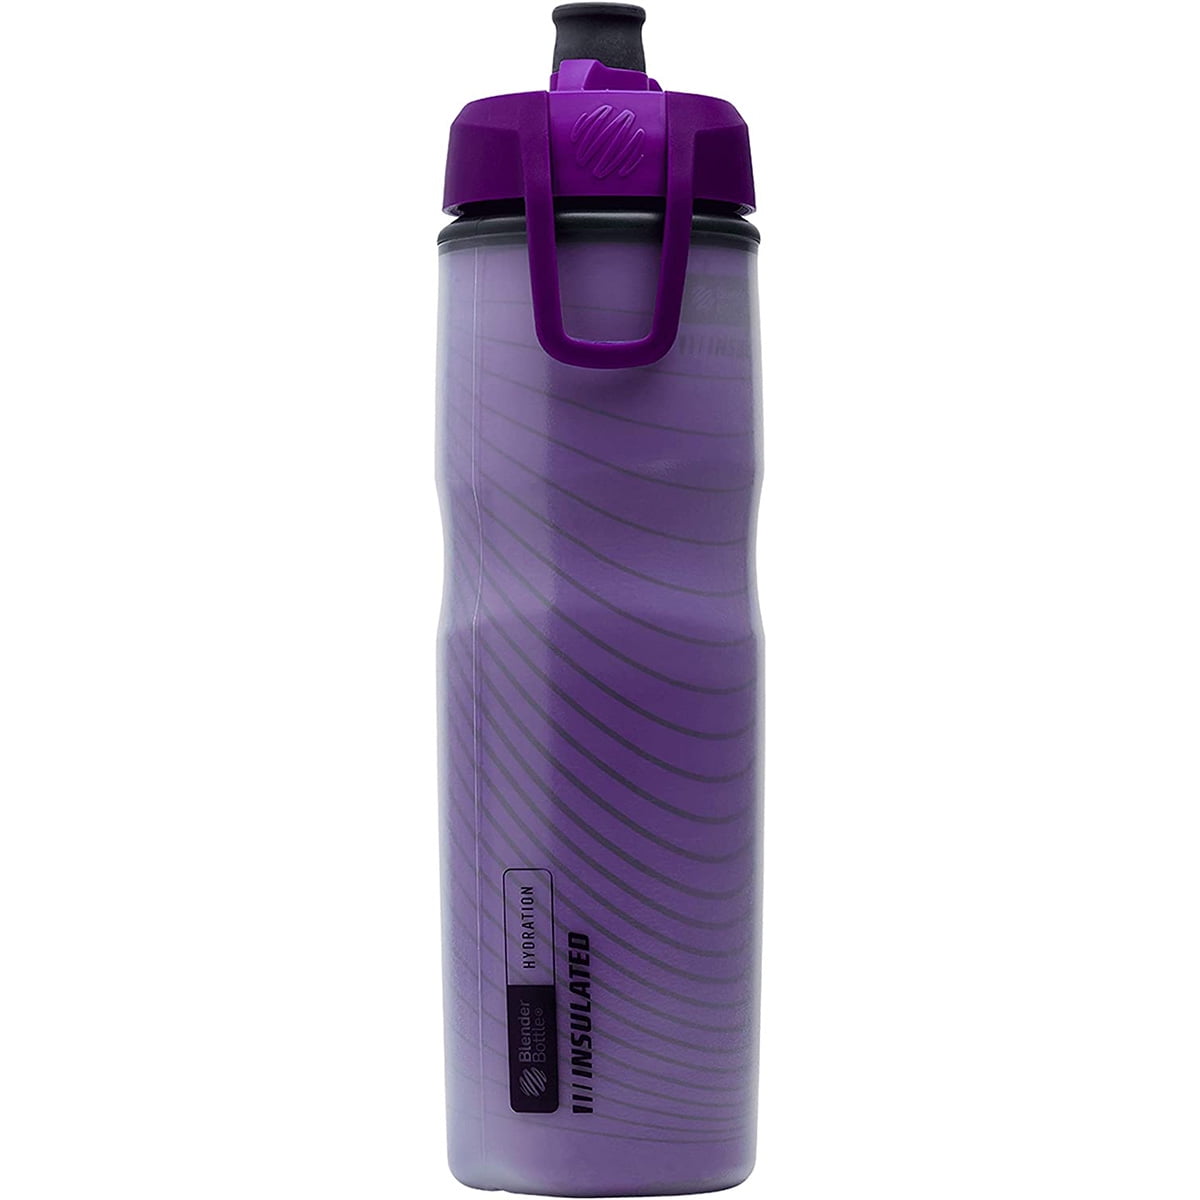 24 oz squeeze water bottles for